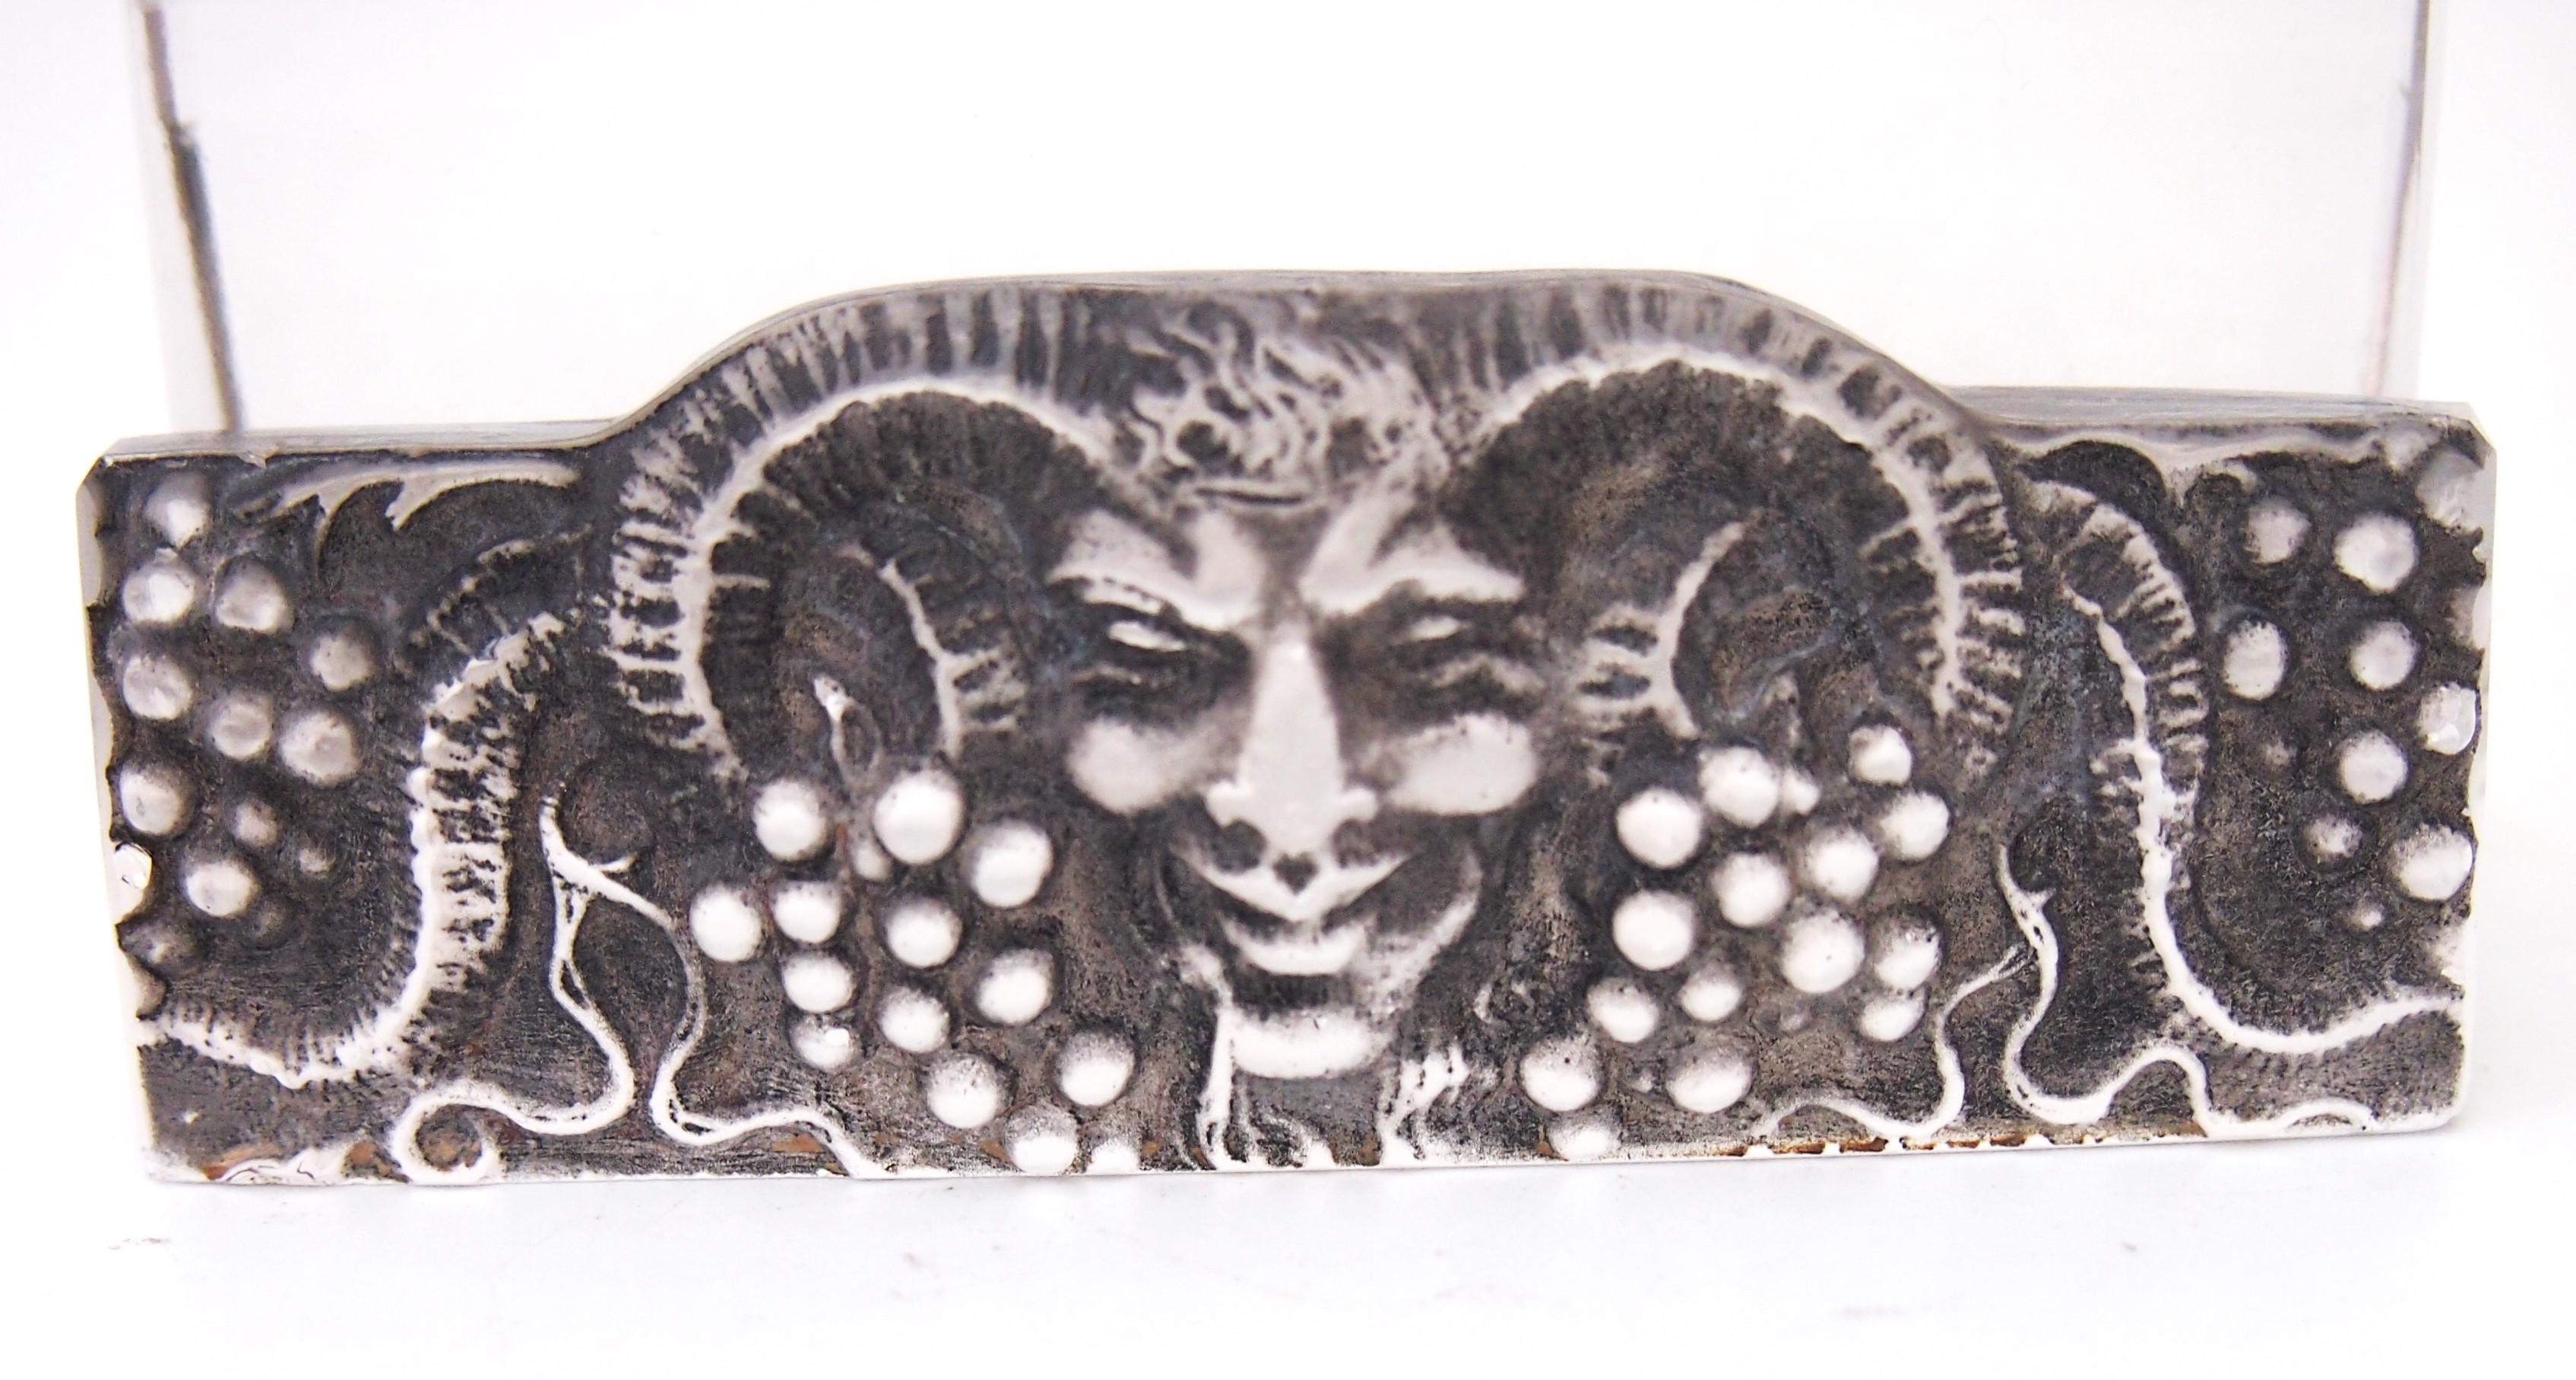 Rare Rene Lalique original Grey Black stained Faune Menu - Ref Marcilhac 3502 page 784 (black edition) -signed 'R Lalique France n: 3502'. This type of Menu holder uniquely was designed to hold a paper menu in it's front crease and lie against the